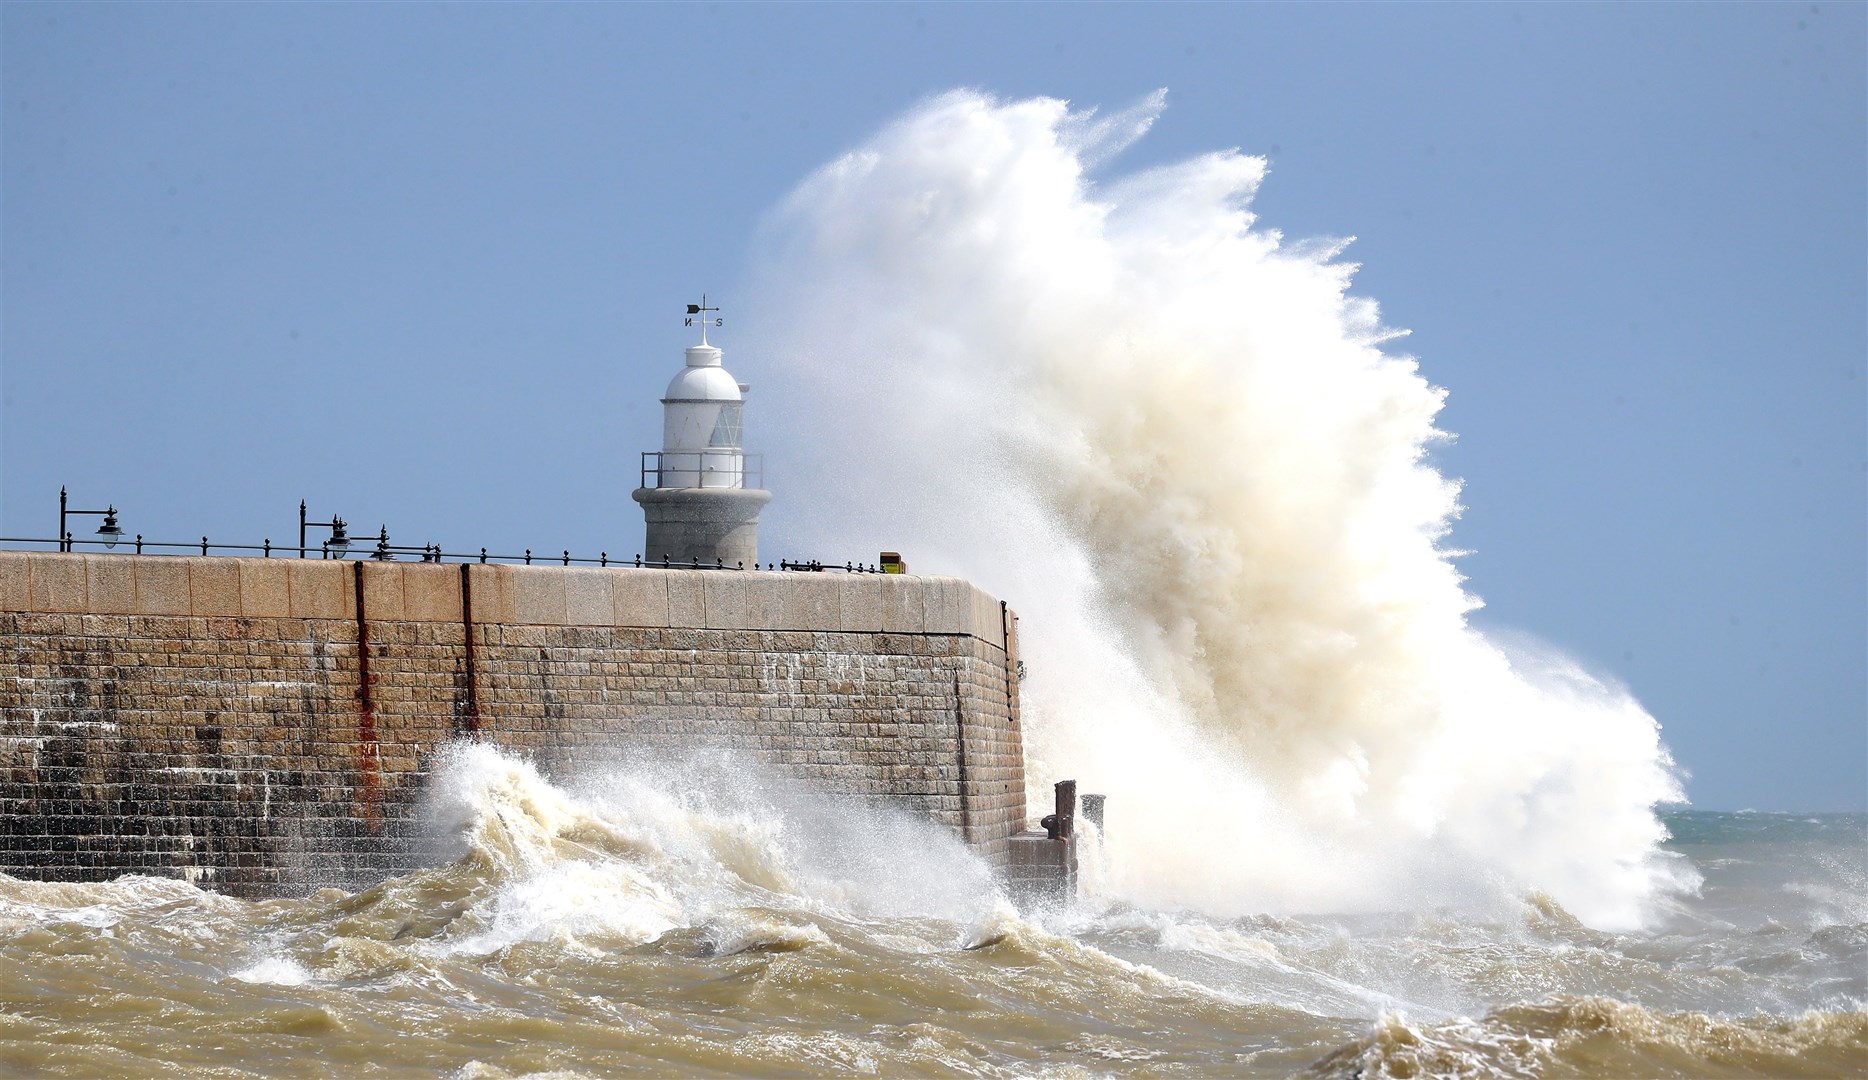 Waves crash over the harbour wall in Folkestone, Kent, on August 21 (Gareth Fuller/PA)